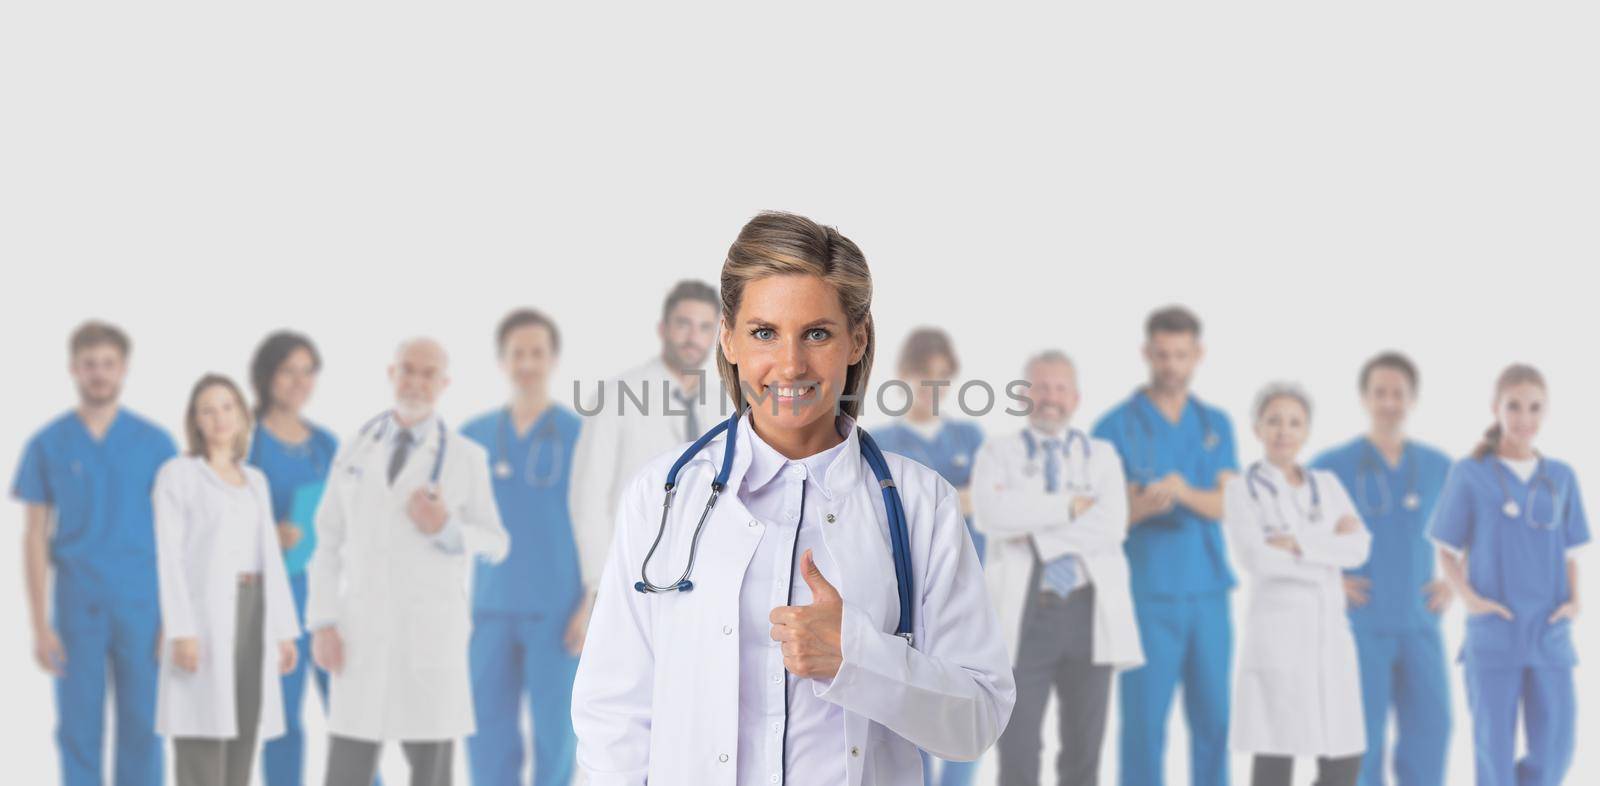 Female doctor giving thumbs up in front of a medical team